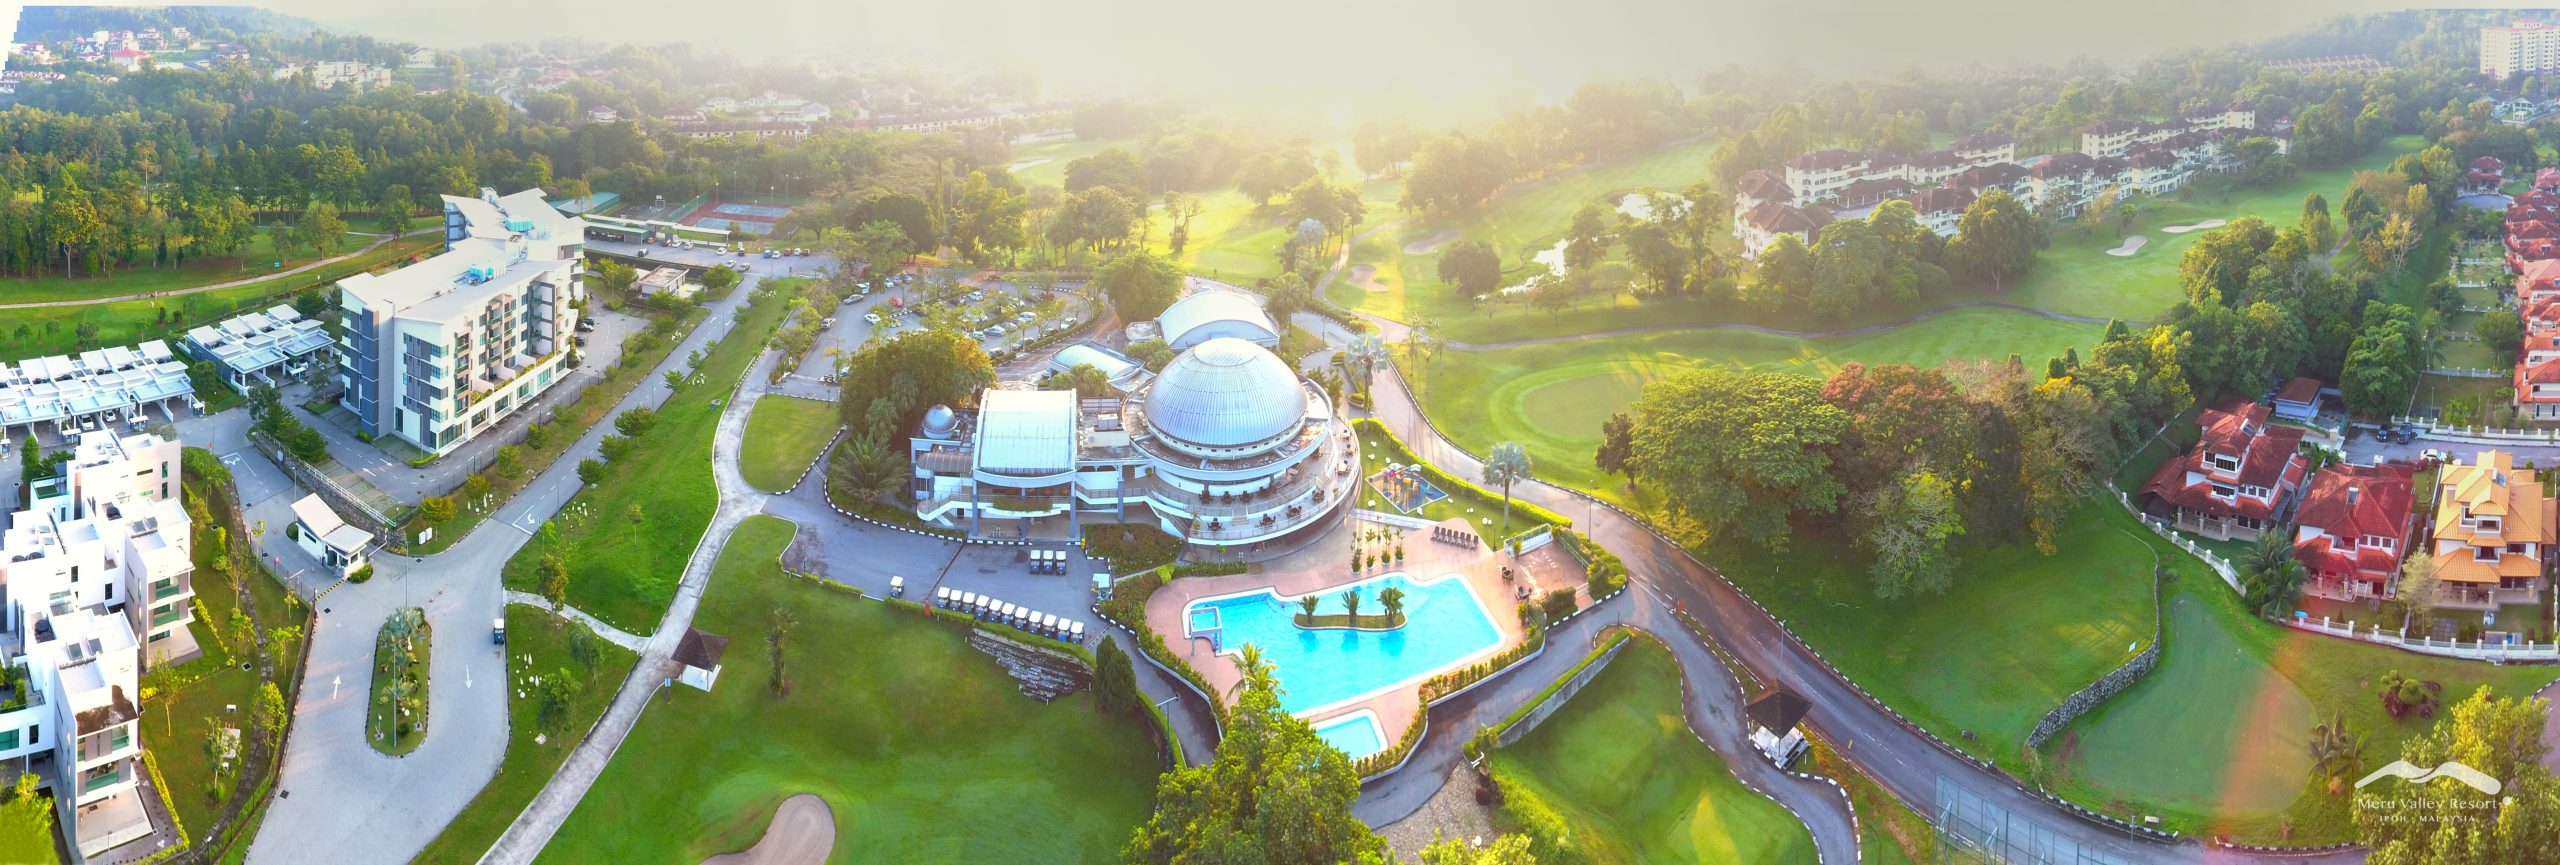 Multi-Facility Clubhouse at the heart of Meru Valley Resort